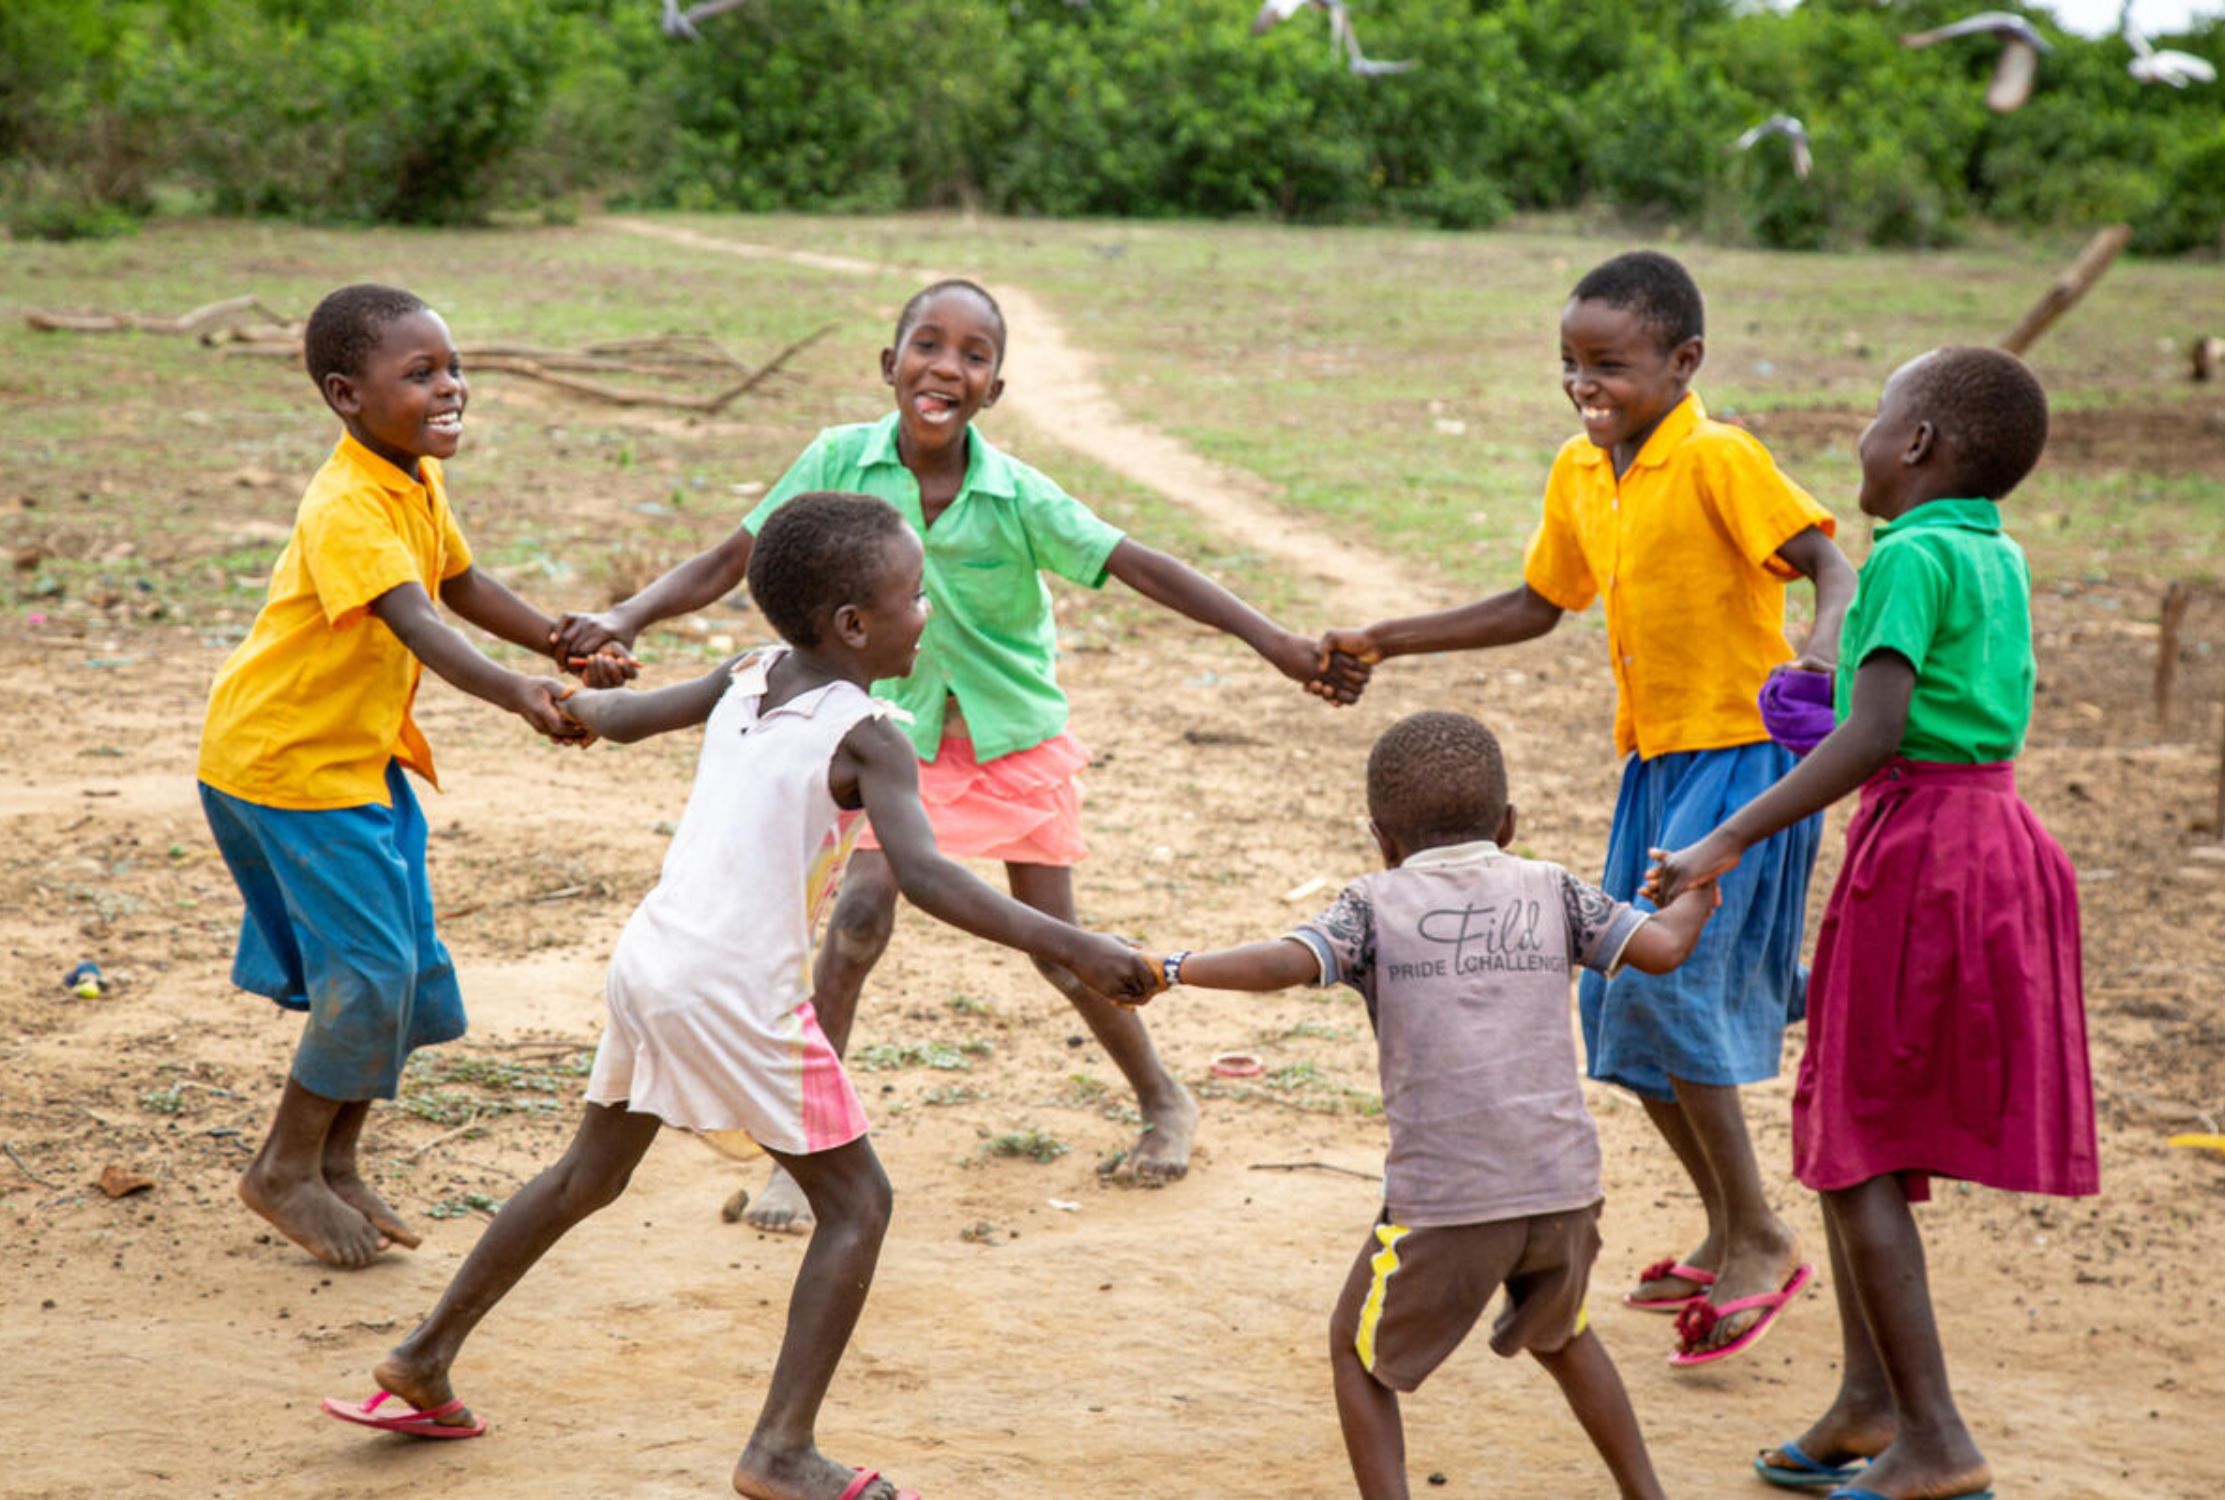 6 Kenyan children enjoy playing happily, holding hands and skipping around in a circle